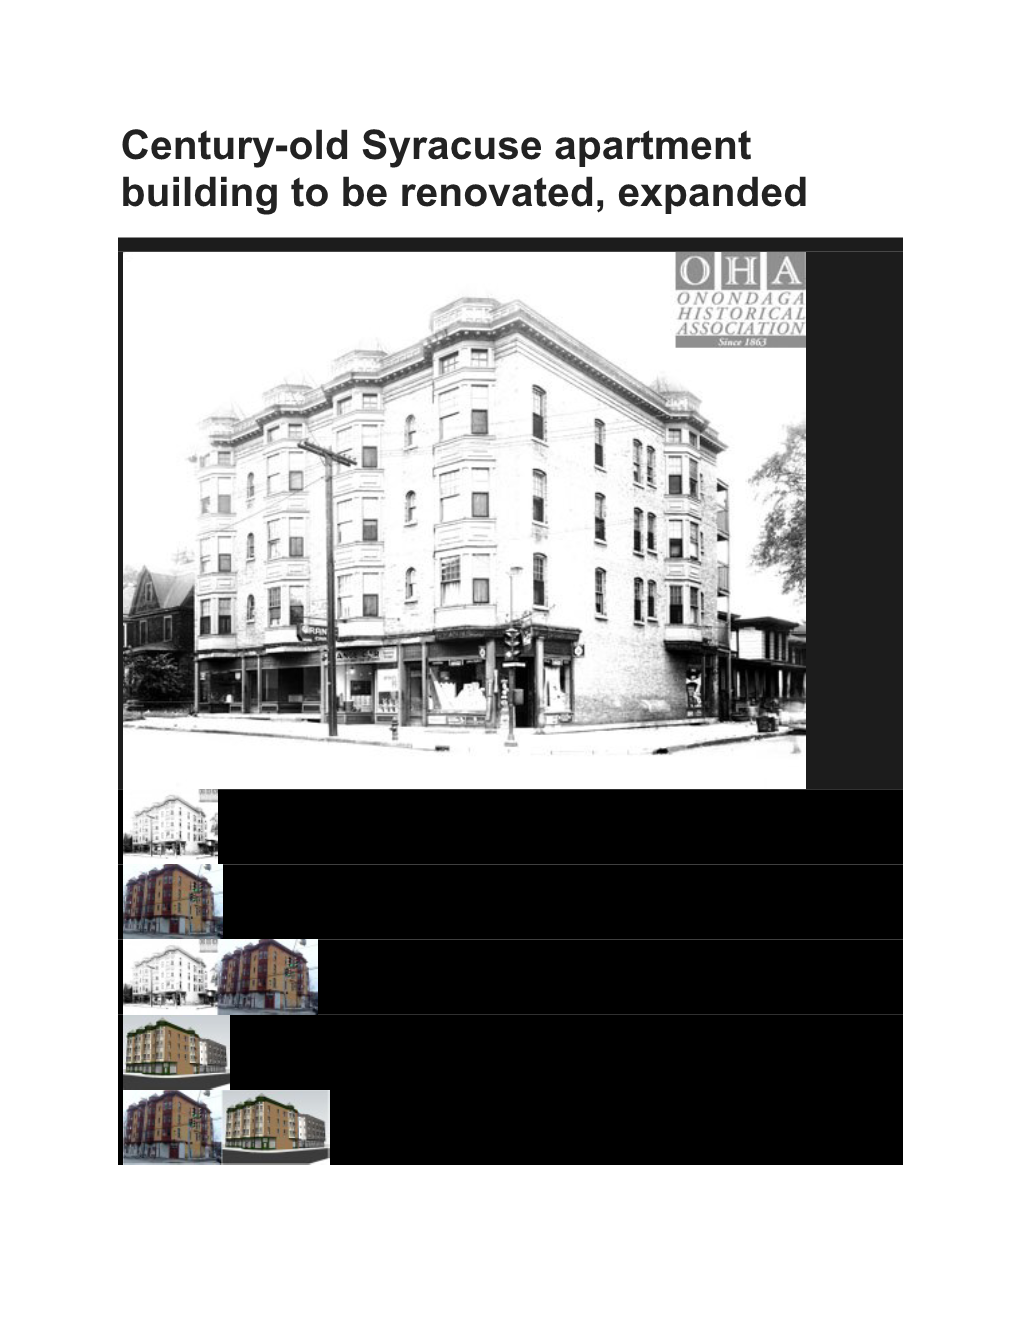 Century-Old Syracuse Apartment Building to Be Renovated, Expanded